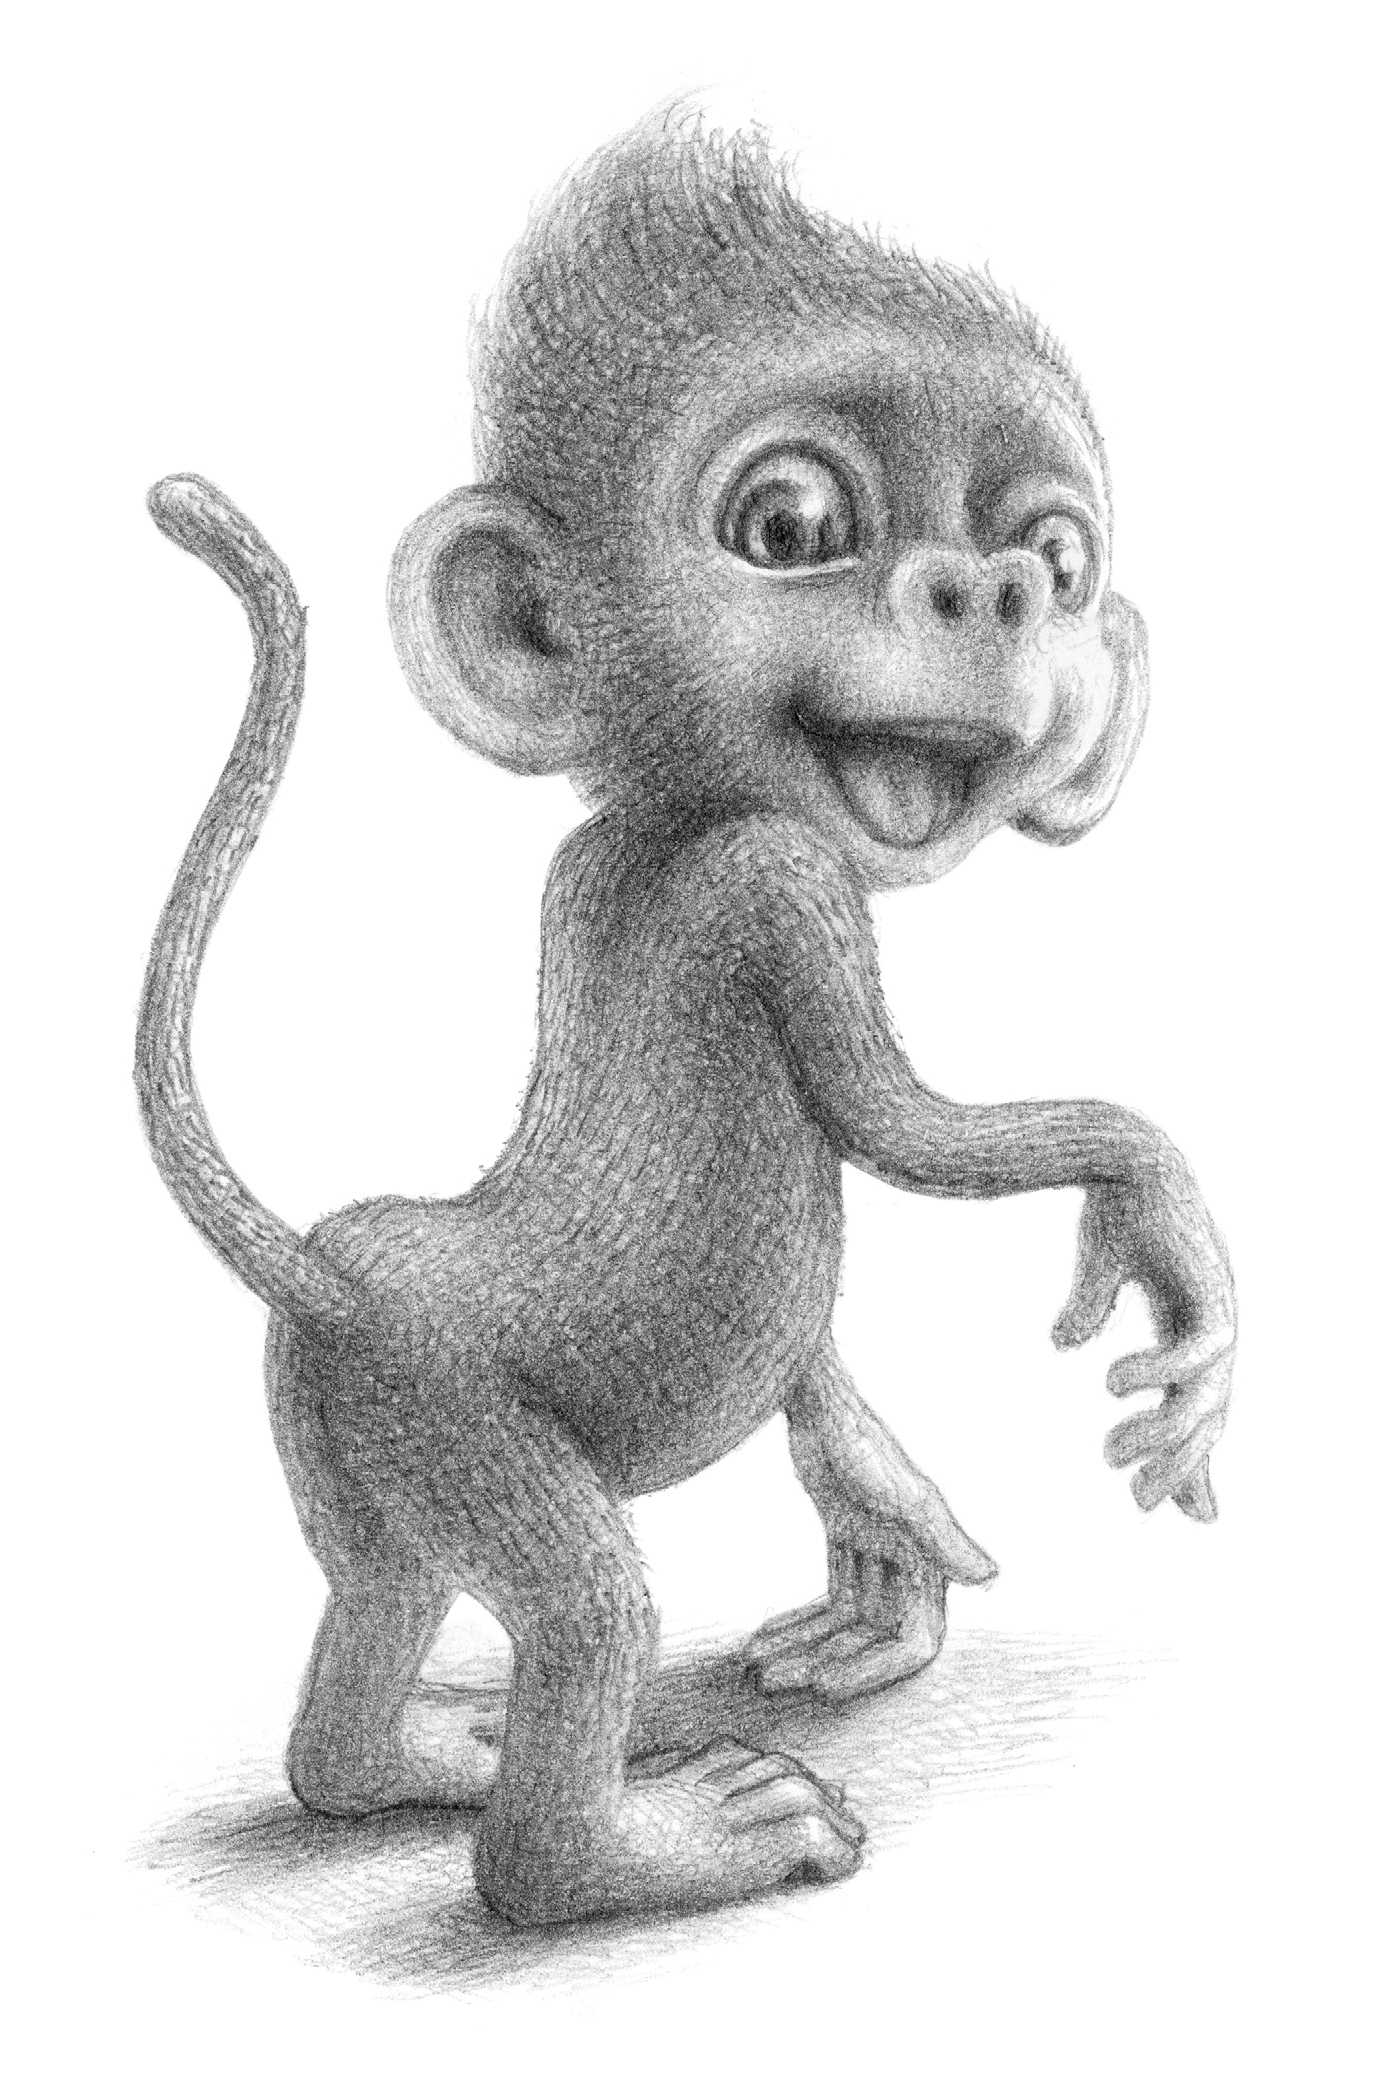 Brian Selznick & David Serlin on the Making of Baby Monkey, Private ...